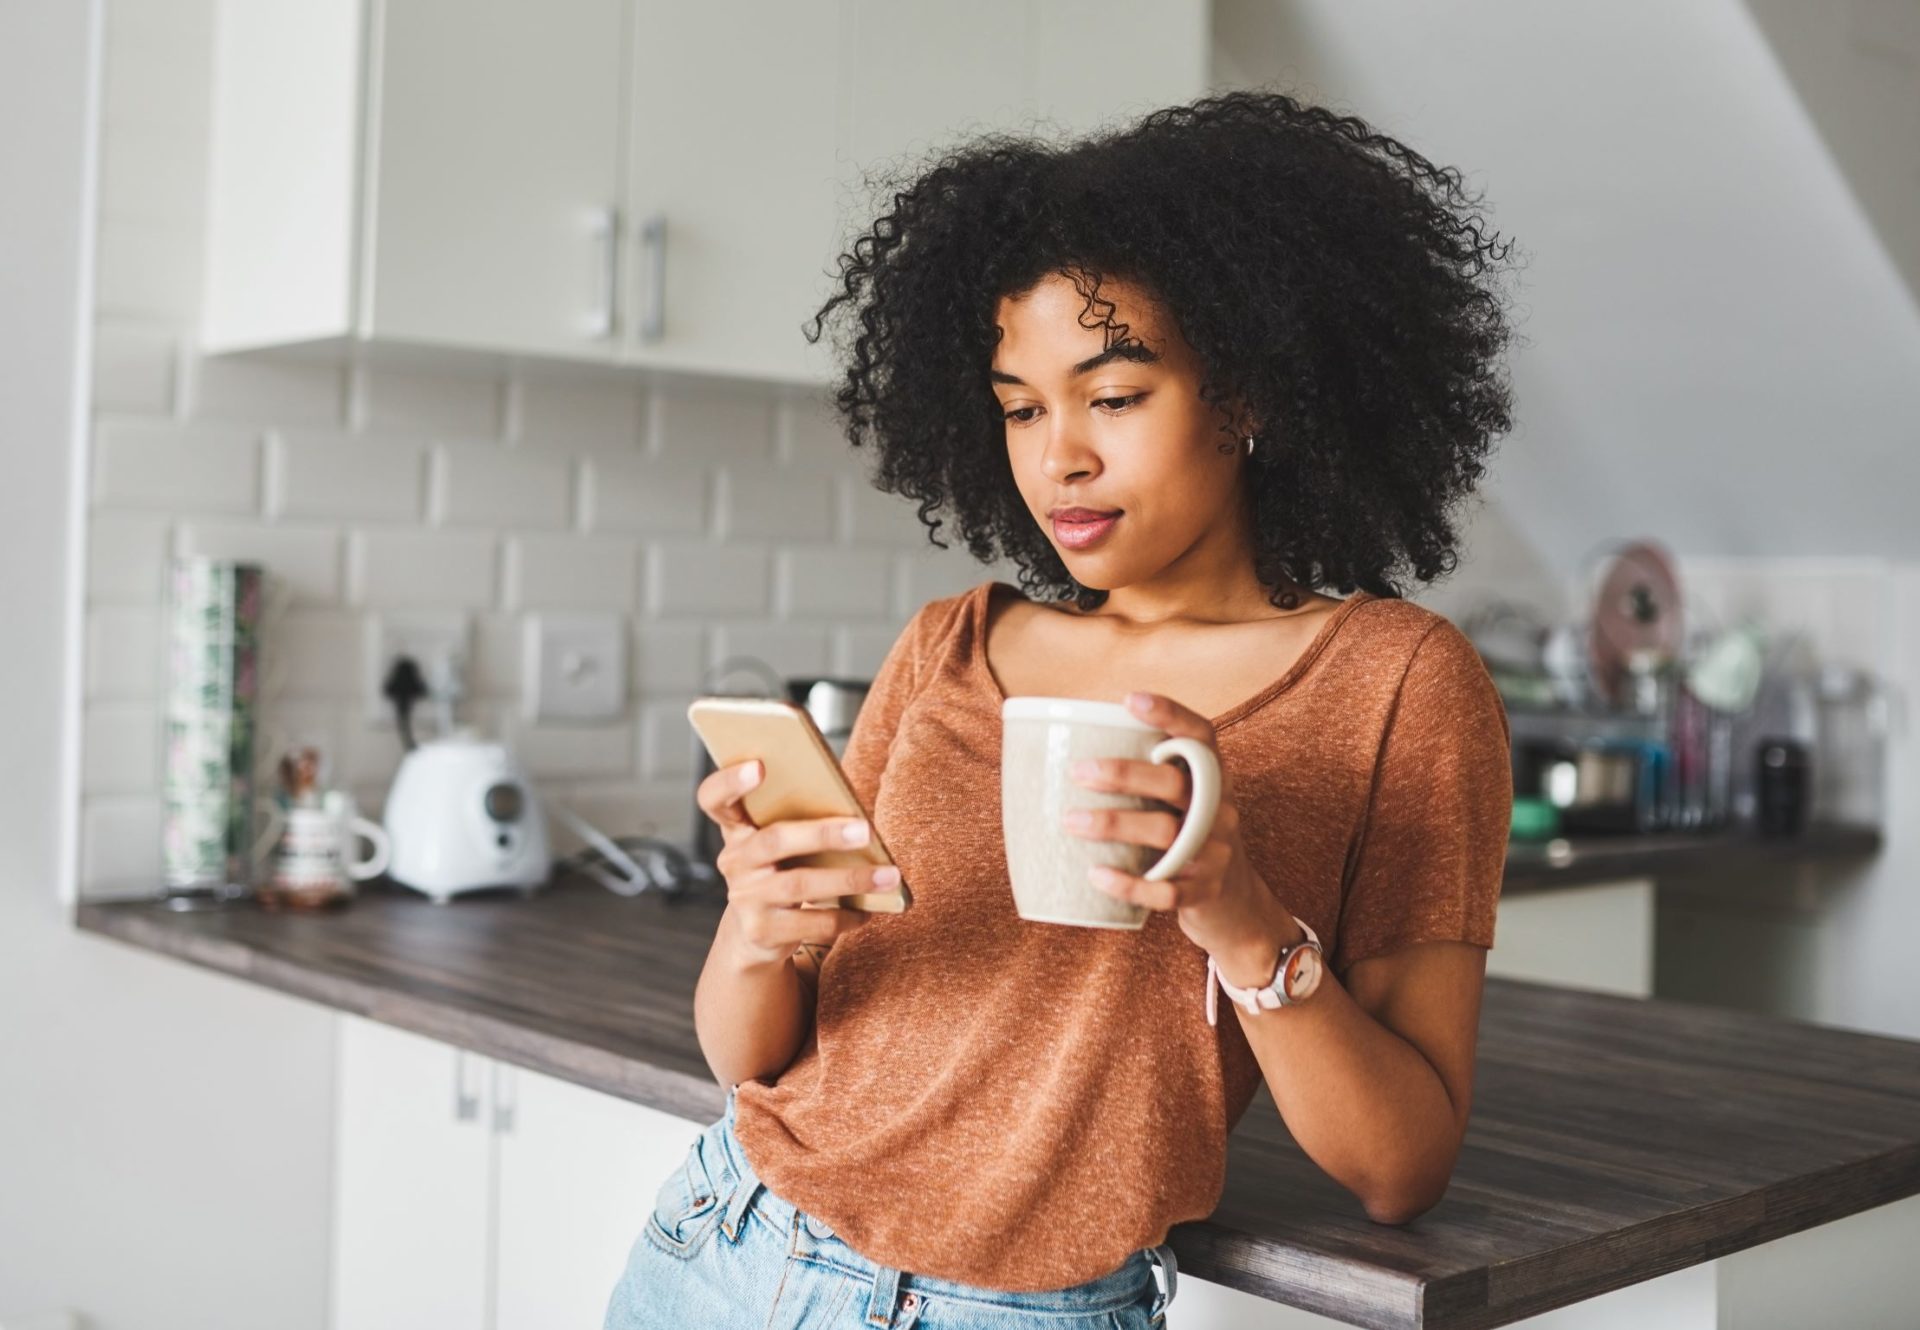 Woman drinking coffee in kitchen with phone in hand